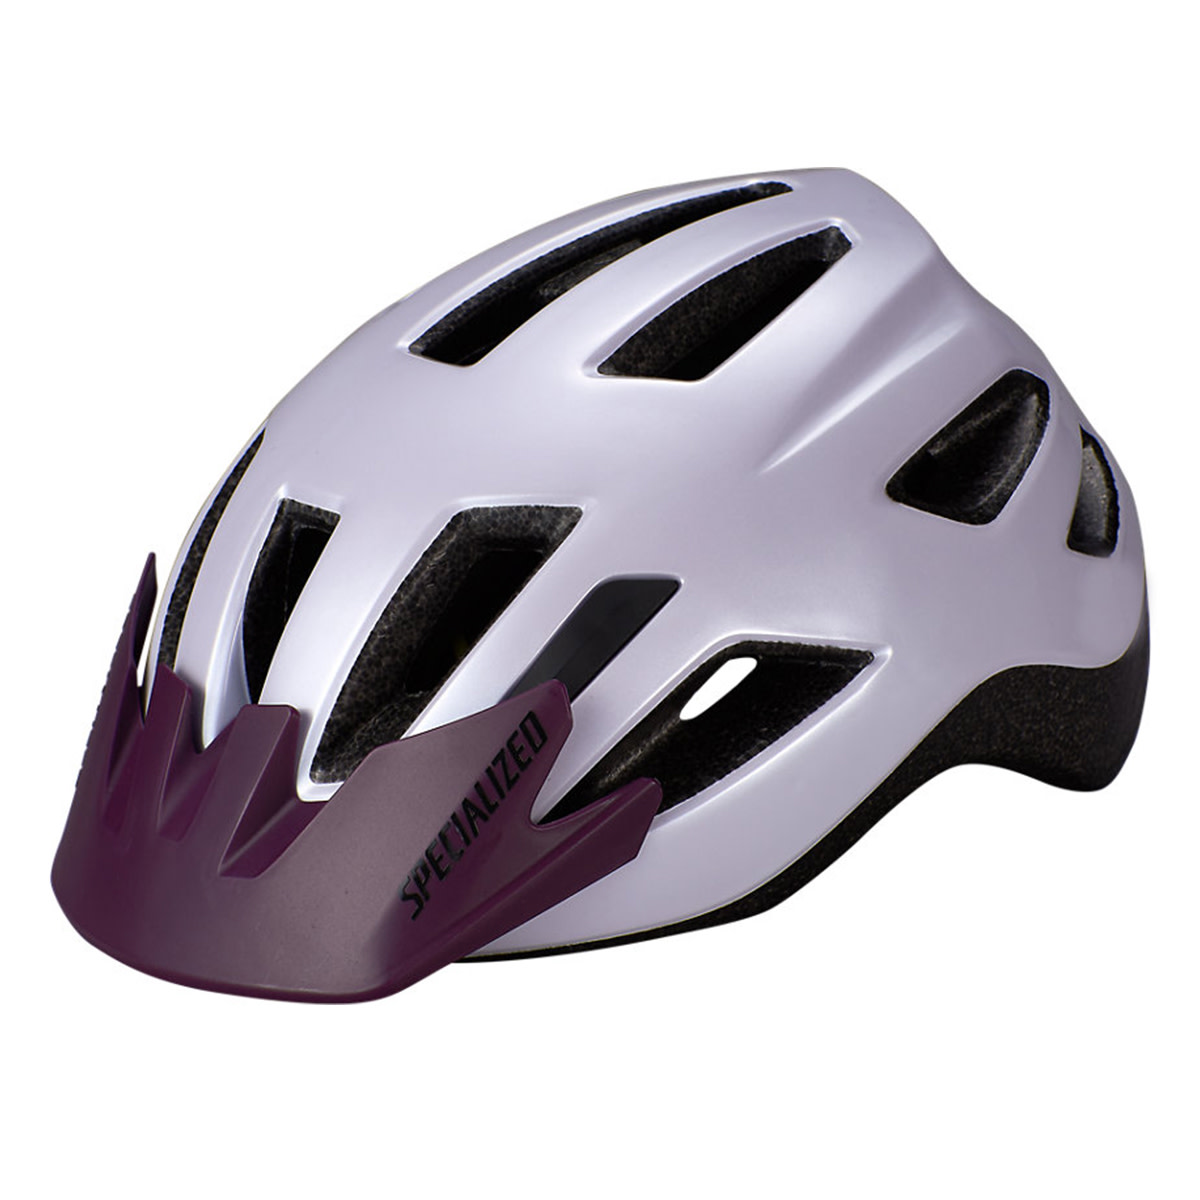 CASQUE SPECIALIZED SHUFFLE CHILD SB LILAS